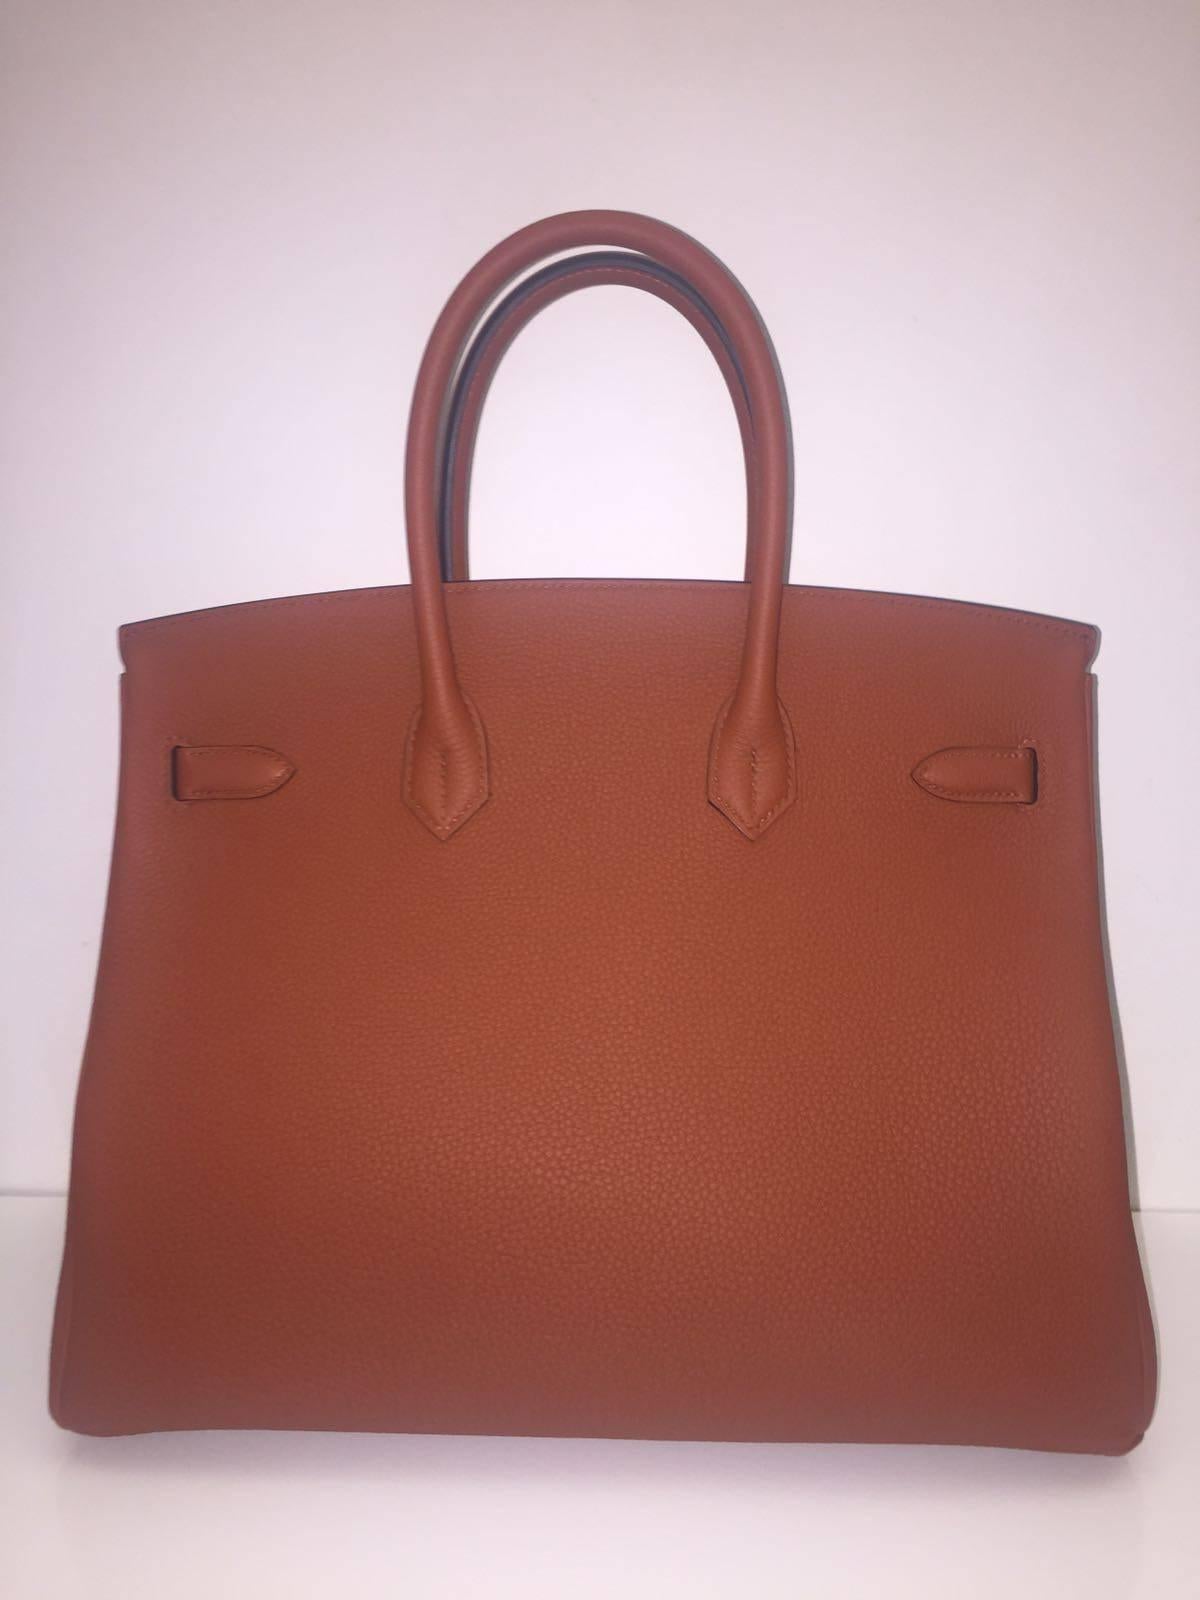 Hermes 
Birkin Size 35
Togo Leather 
Colour Cuivre
Gold Hardware
store fresh, comes with receipt and full set (dust bag, box...) 
Hydeparkfashion specializes in sourcing and delivering authentic luxury handbags, mainly Hermes, to client around the